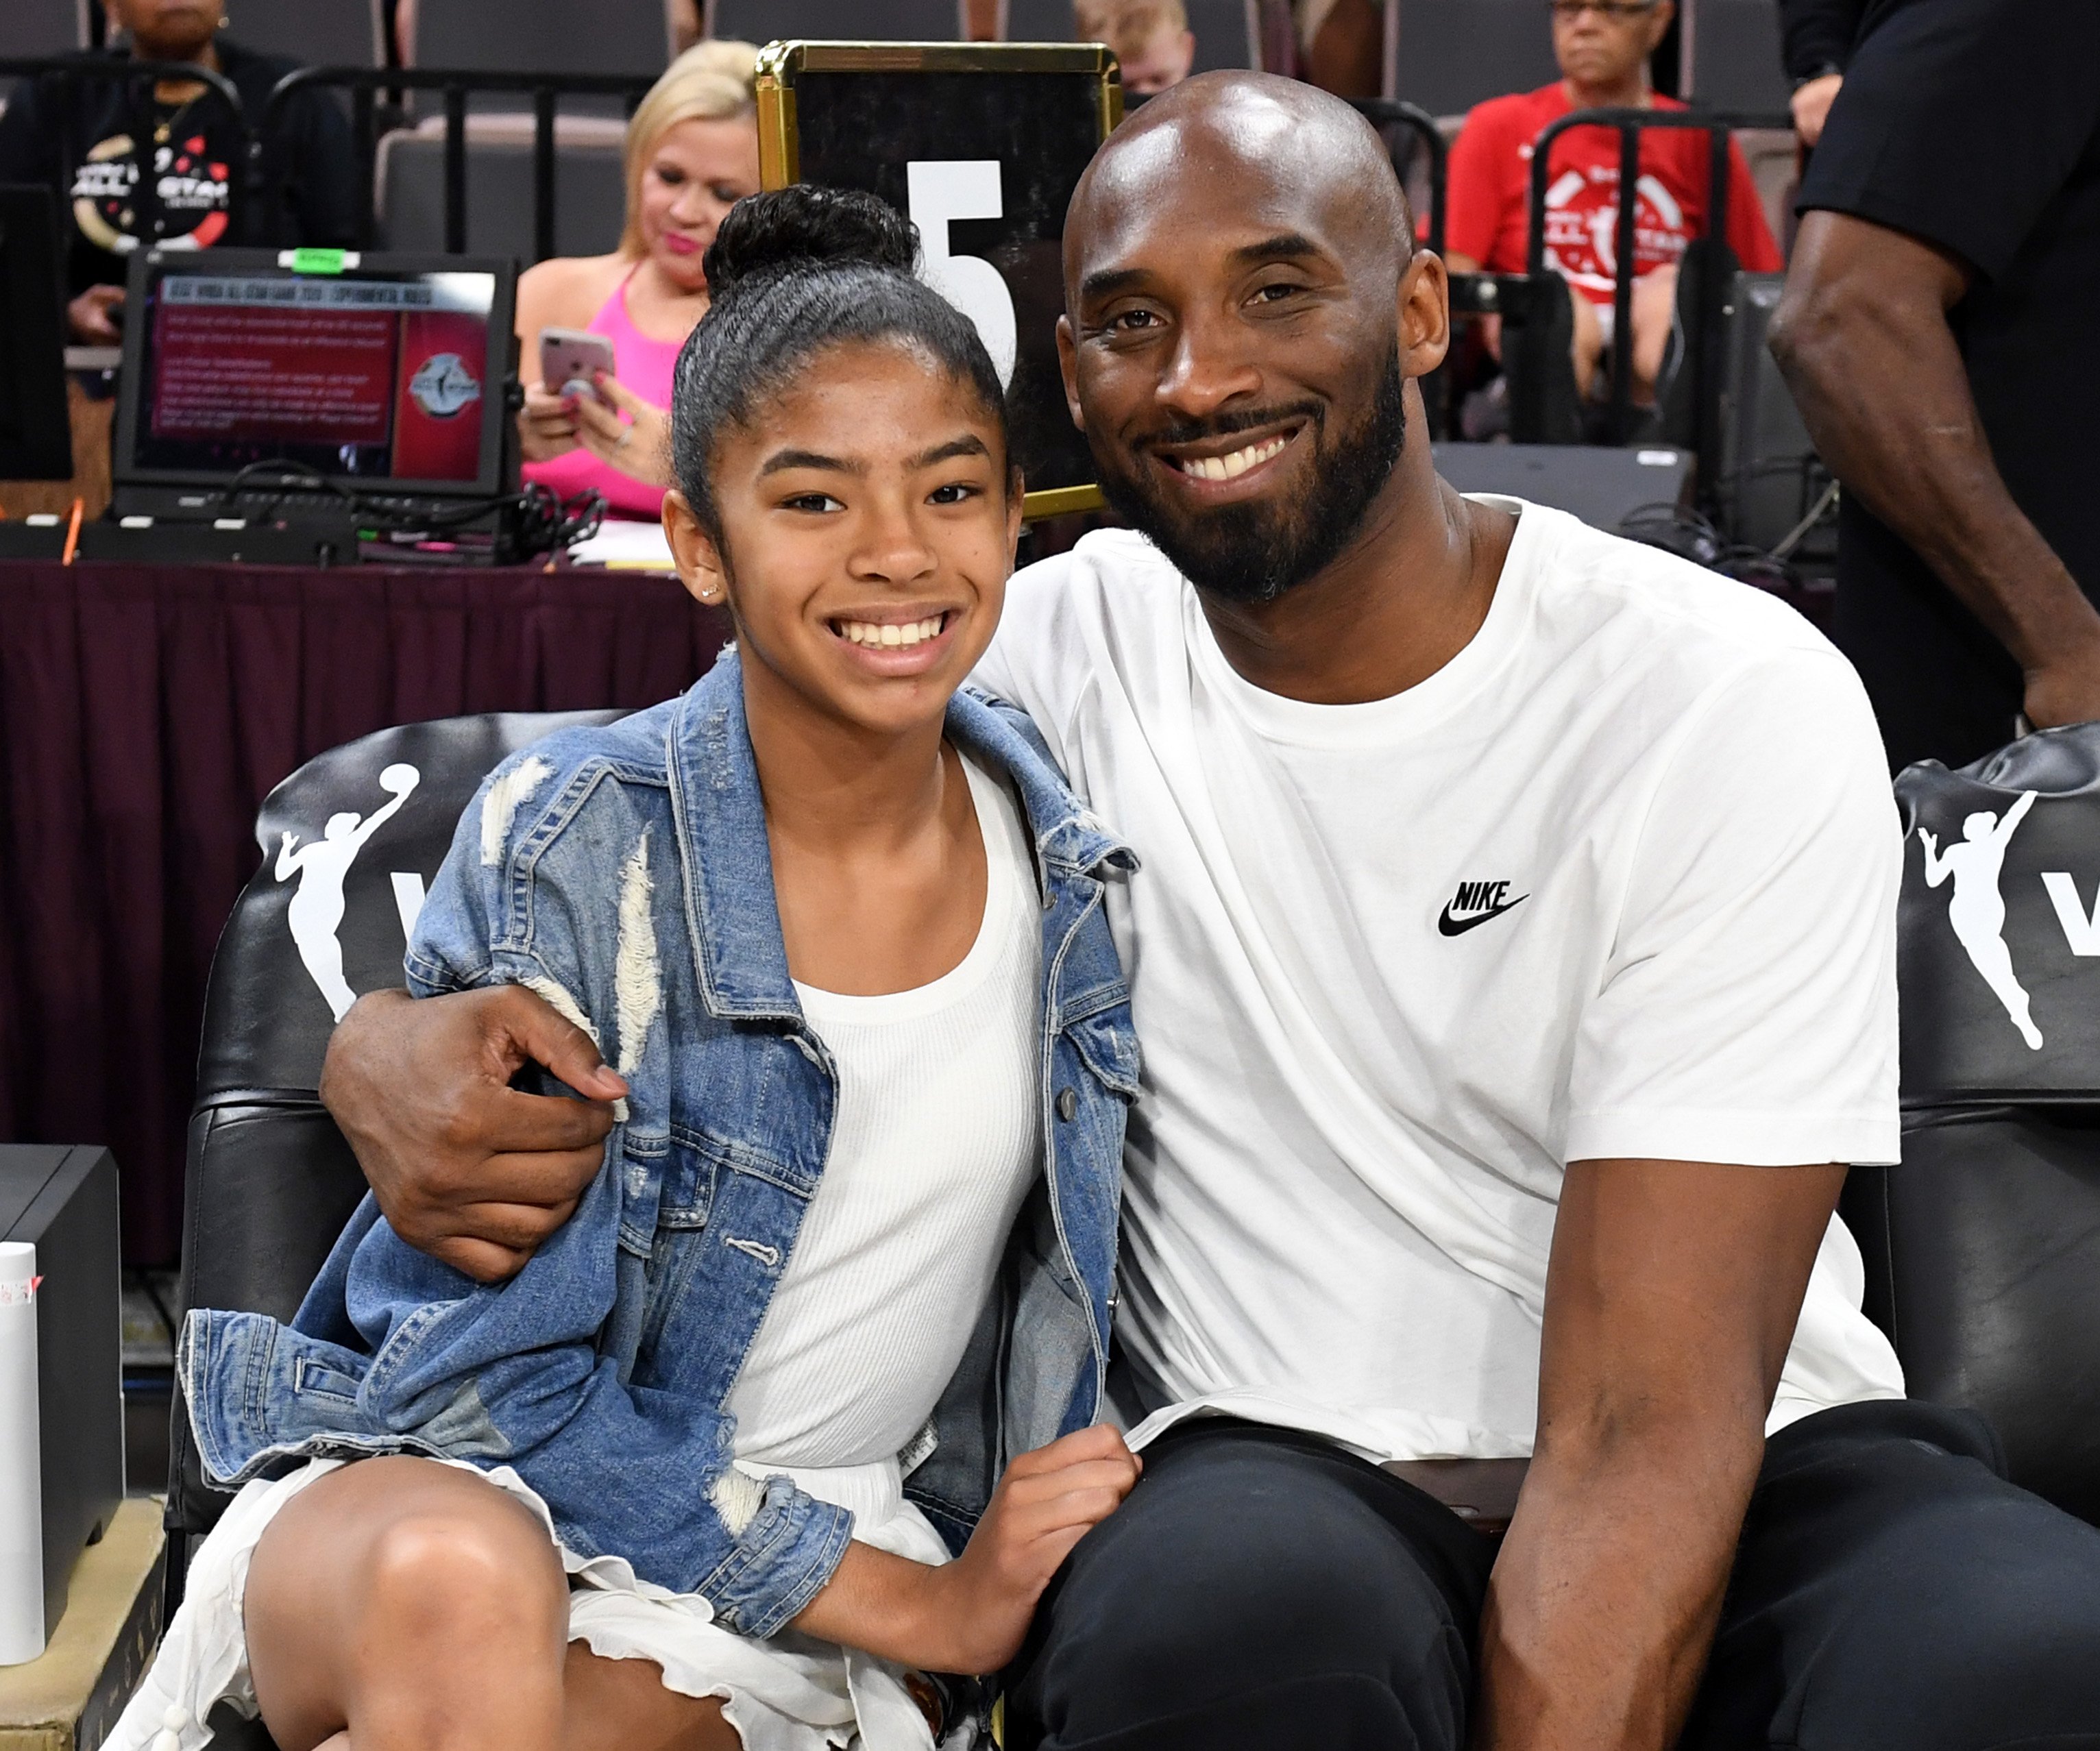 Kobe Bryant and his daughter Gianna attend the WNBA All-Star Game 2019 at the Mandalay Bay Events Center on July 27, 2019, in Las Vegas, Nevada. | Source: Getty Images.